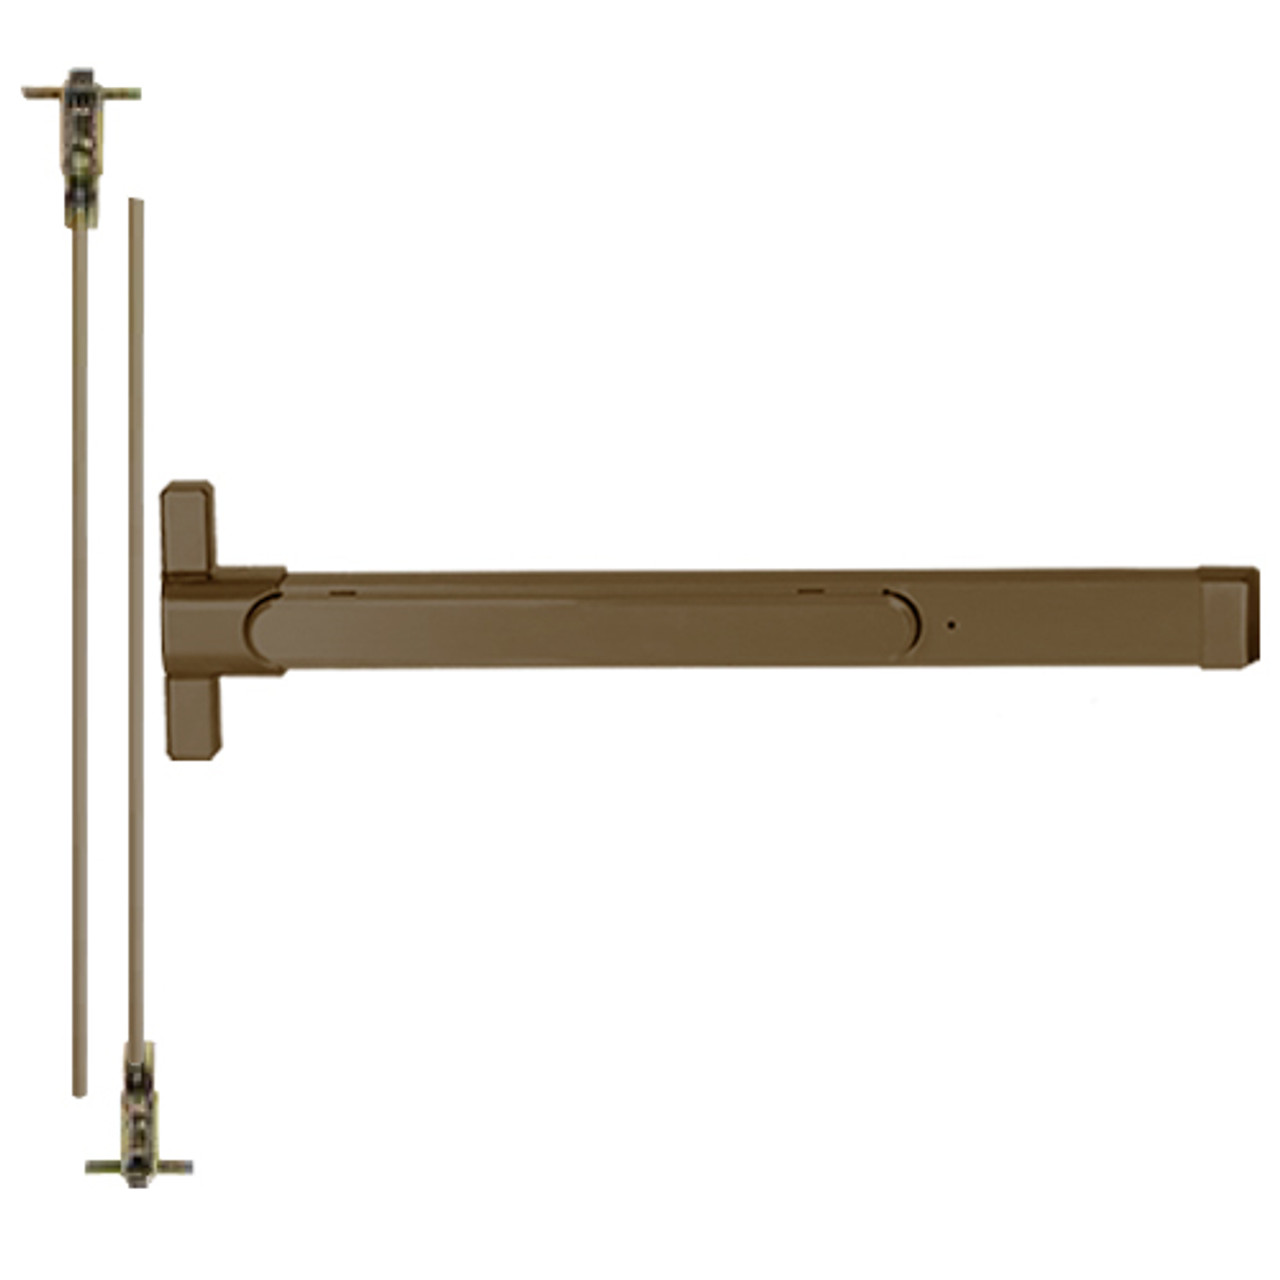 QED225-36-7-313AN-LC Stanley QED200 Series Heavy Duty Narrow Stile Concealed Vertical Rod Cylinder Dog Exit Device in Anodized Duranodic Bronze Finish